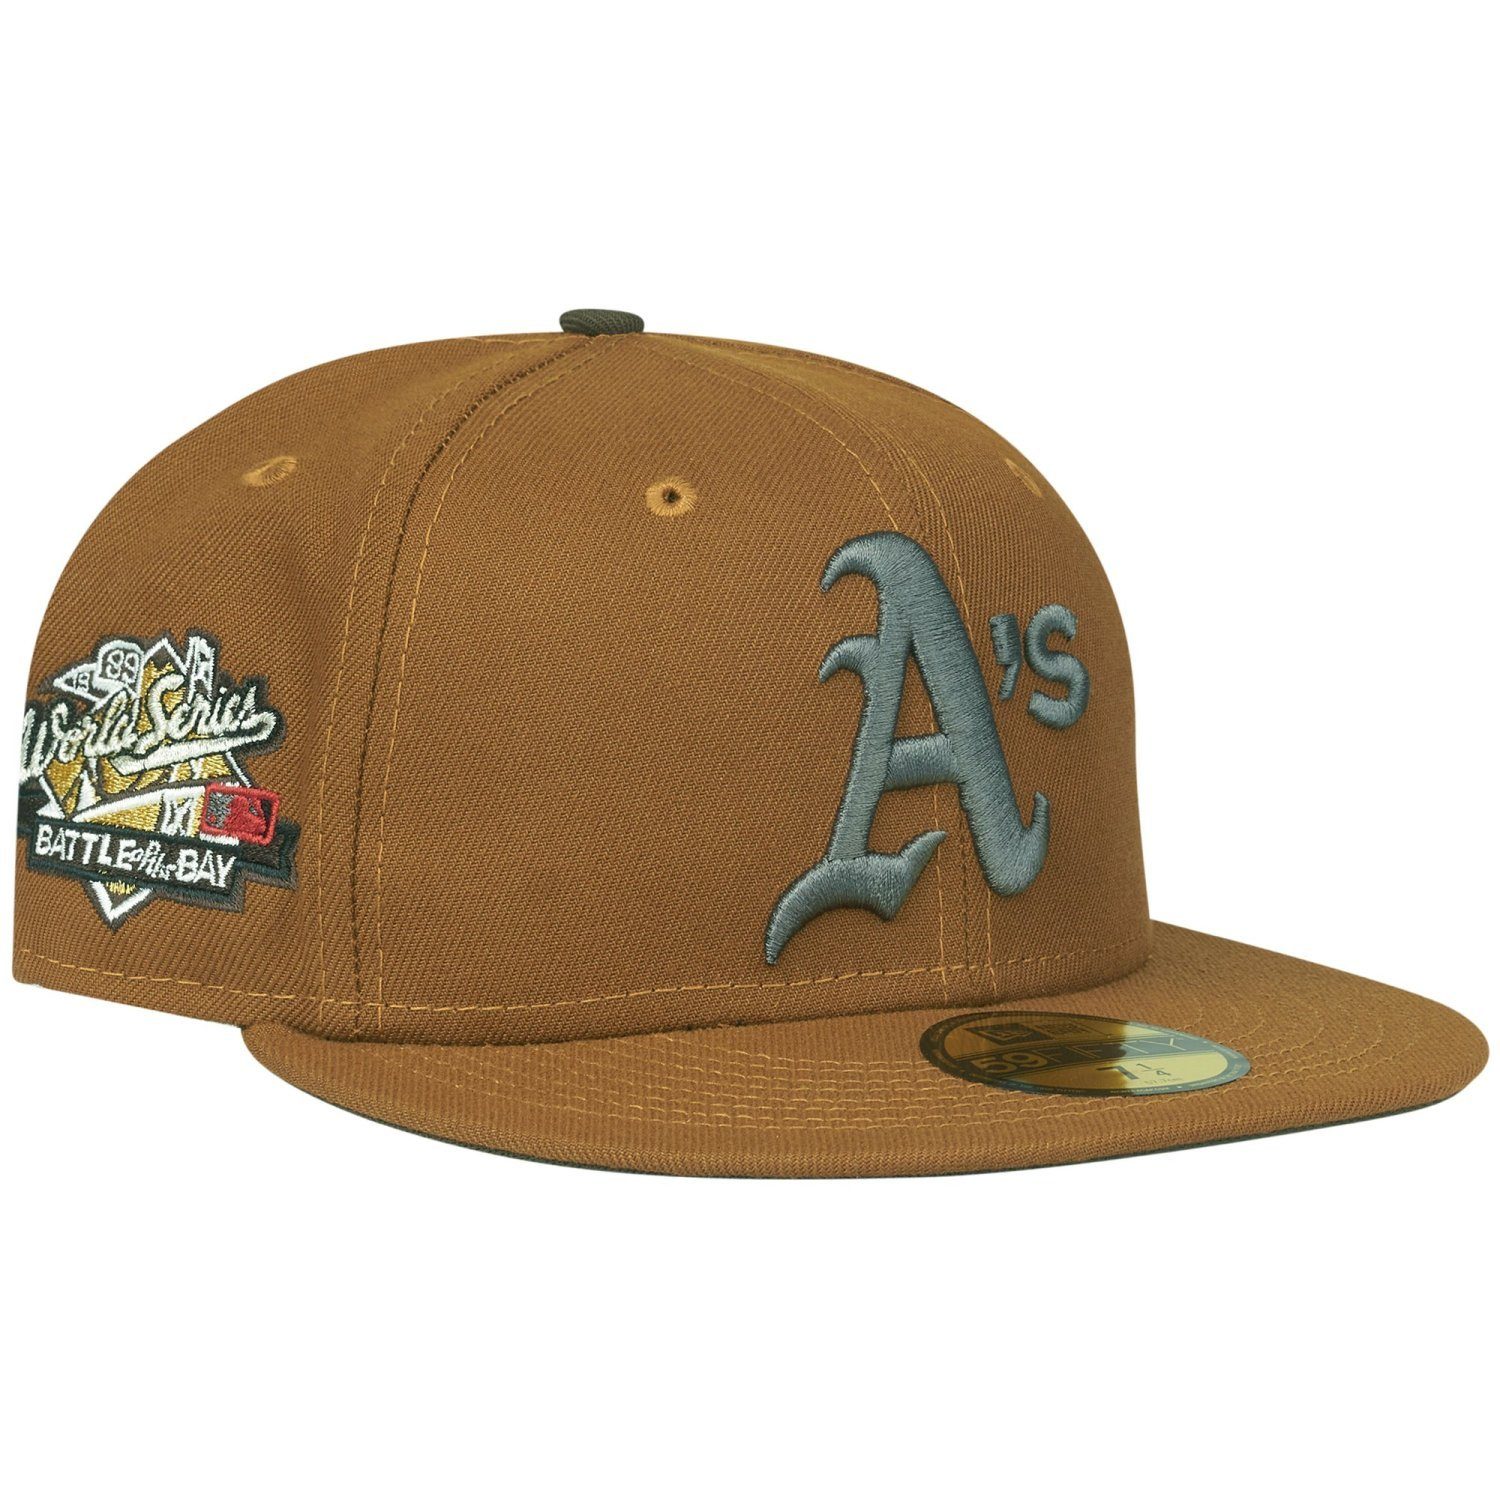 New Era Fitted Cap 59Fifty WORLD SERIES 1989 Oakland Athletics